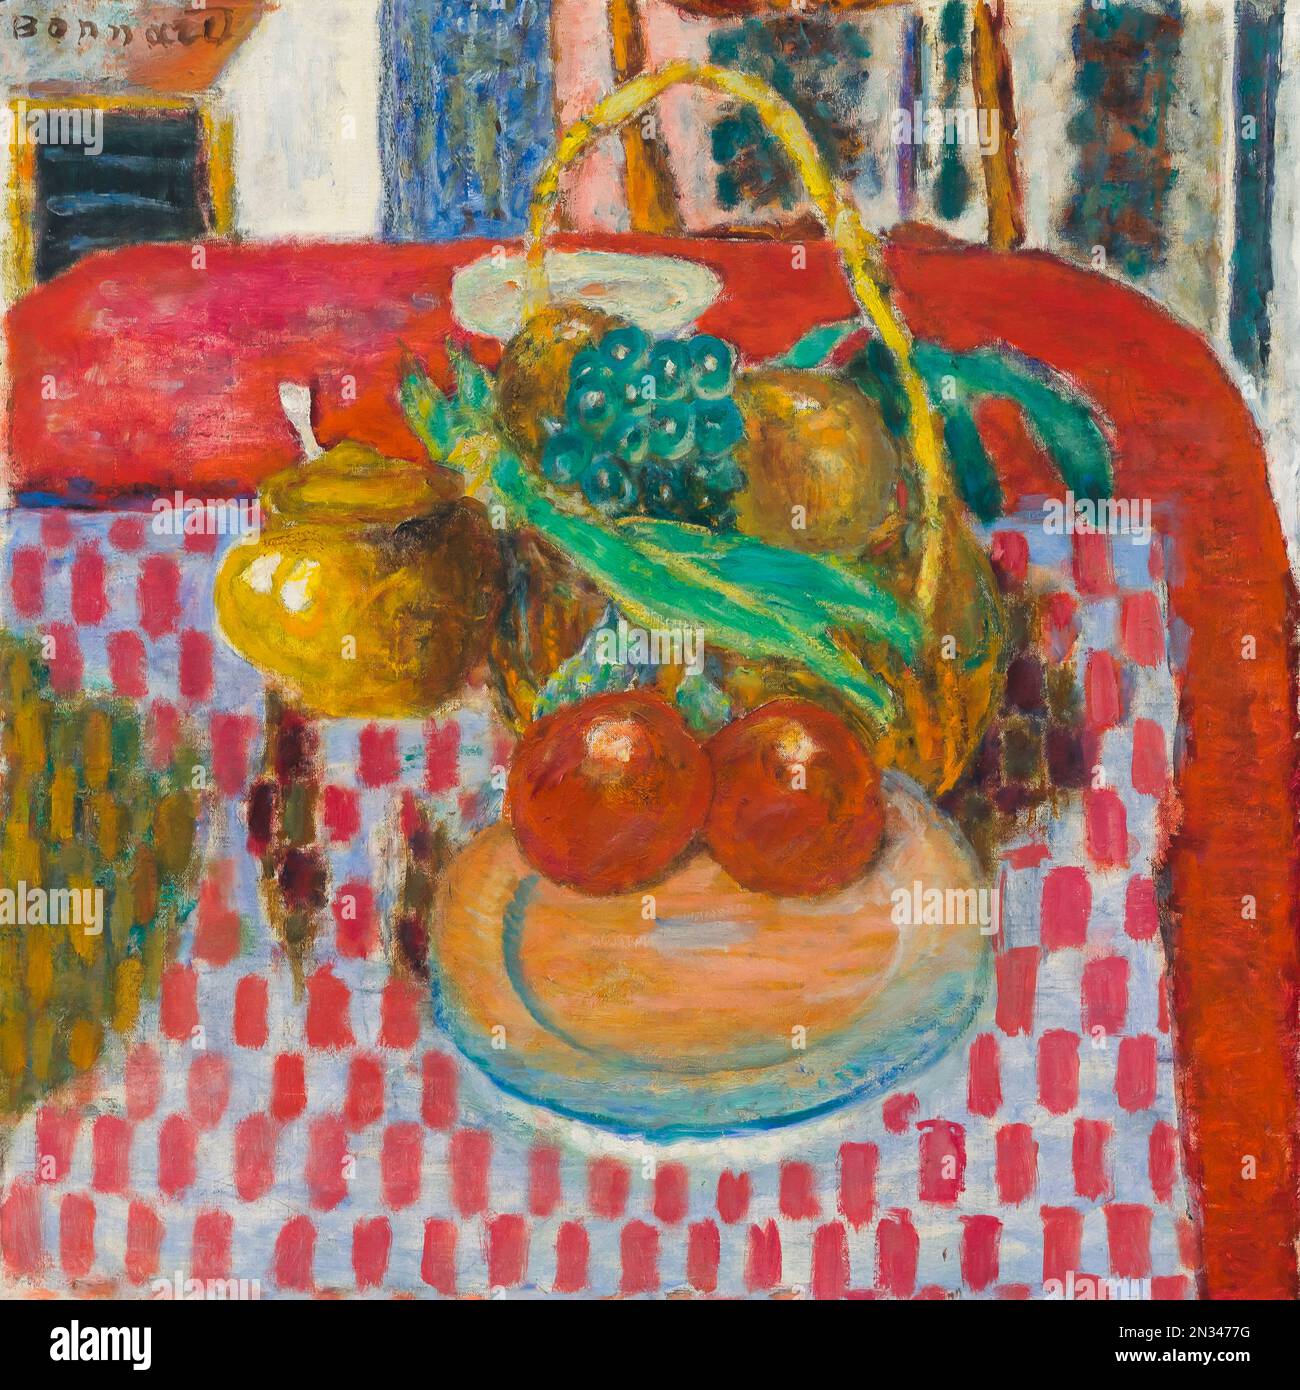 The Checkered Tablecloth, Pierre Bonnard, 1939, Art Institute of Chicago, Chicago, Illinois, USA, North America Stock Photo